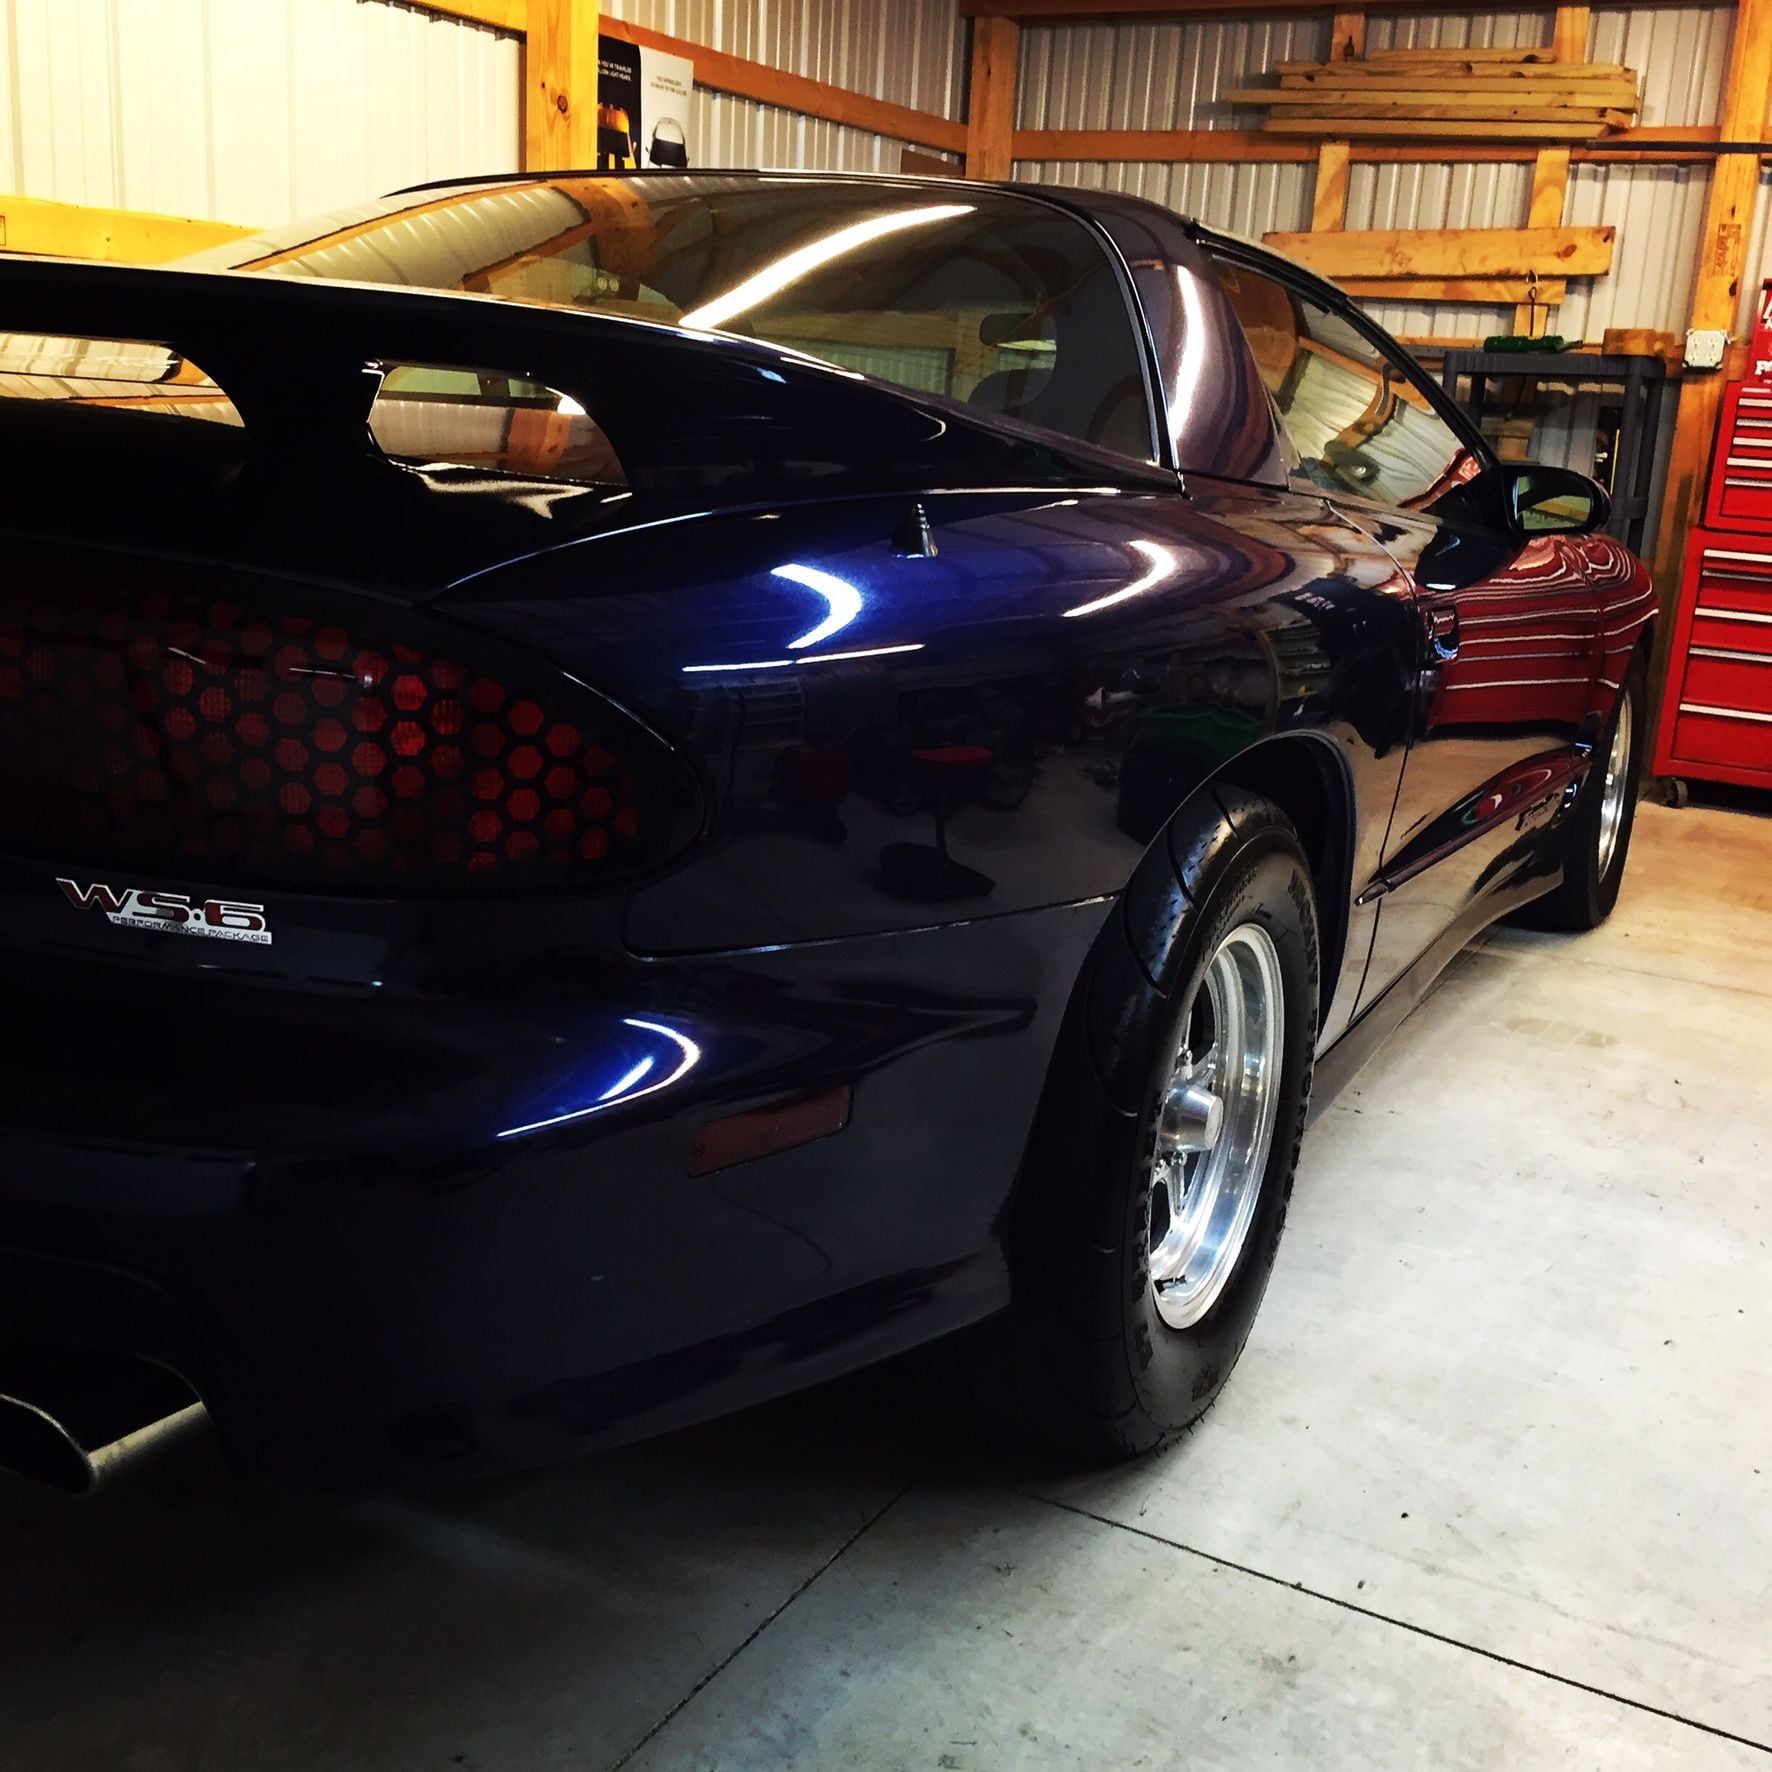 2002 Pontiac Firebird - 2002 Trans Am WS6! Brand new QP 9" , and Trans and converter PRC 225's  FAST and more - Used - VIN 2G2FV22G222158197 - 8 cyl - 2WD - Automatic - Coupe - Blue - Medina, NY 14103, United States